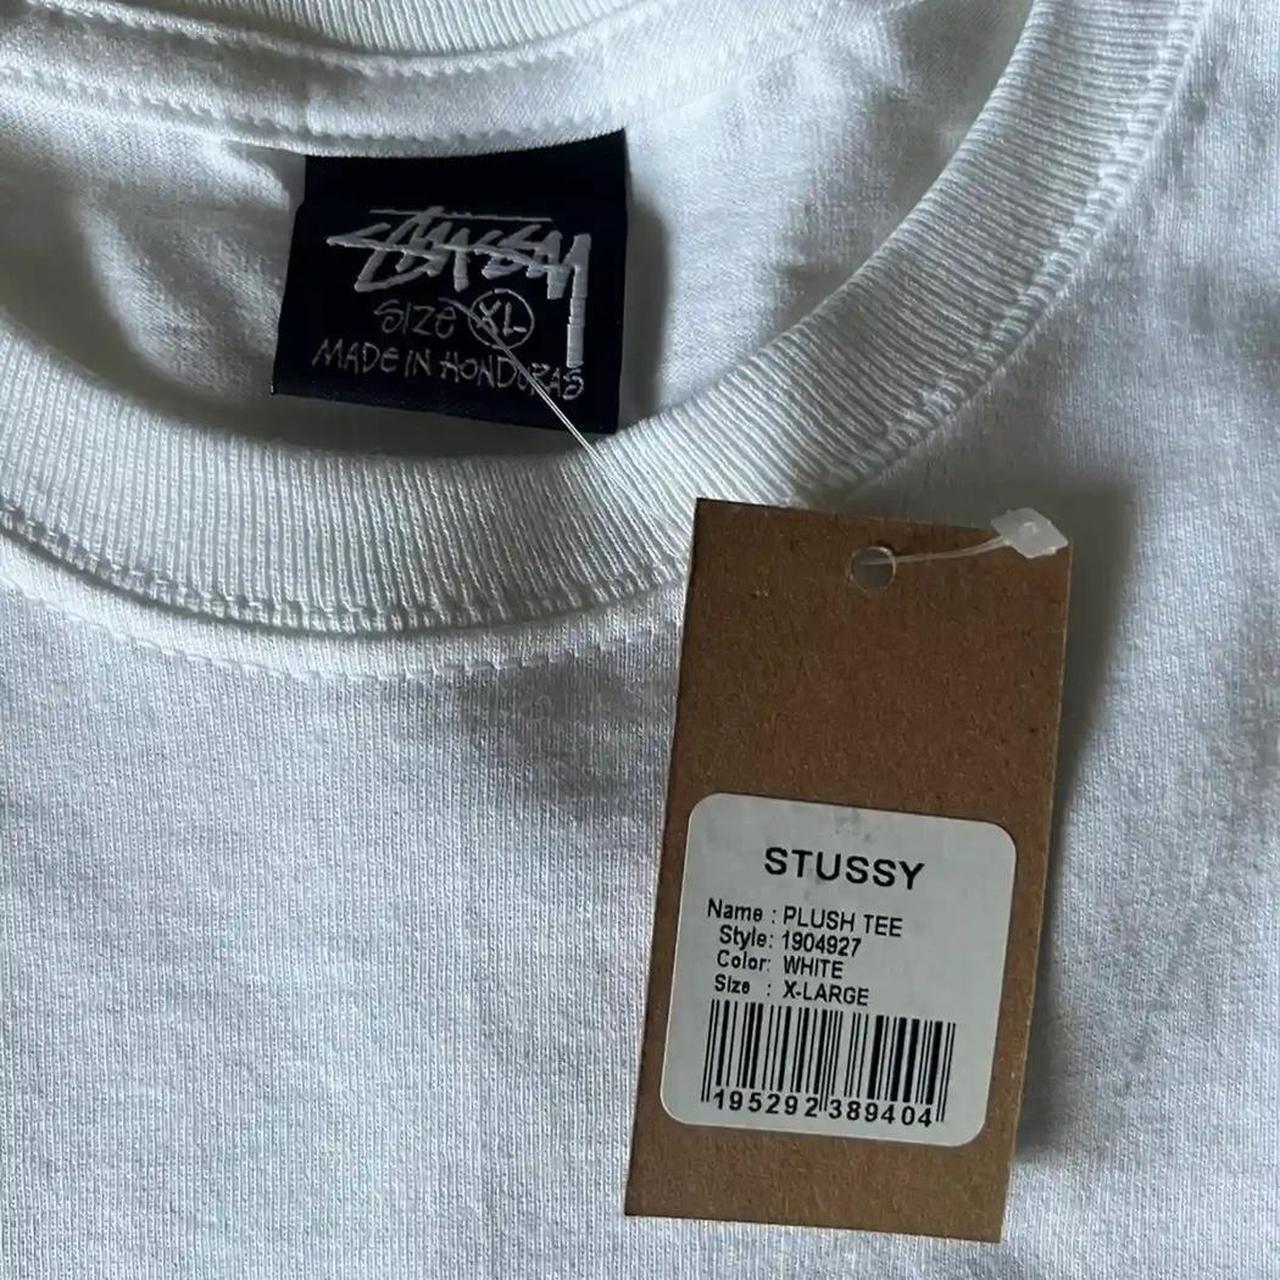 Stussy - plush white tee (graphic on back of tee)...